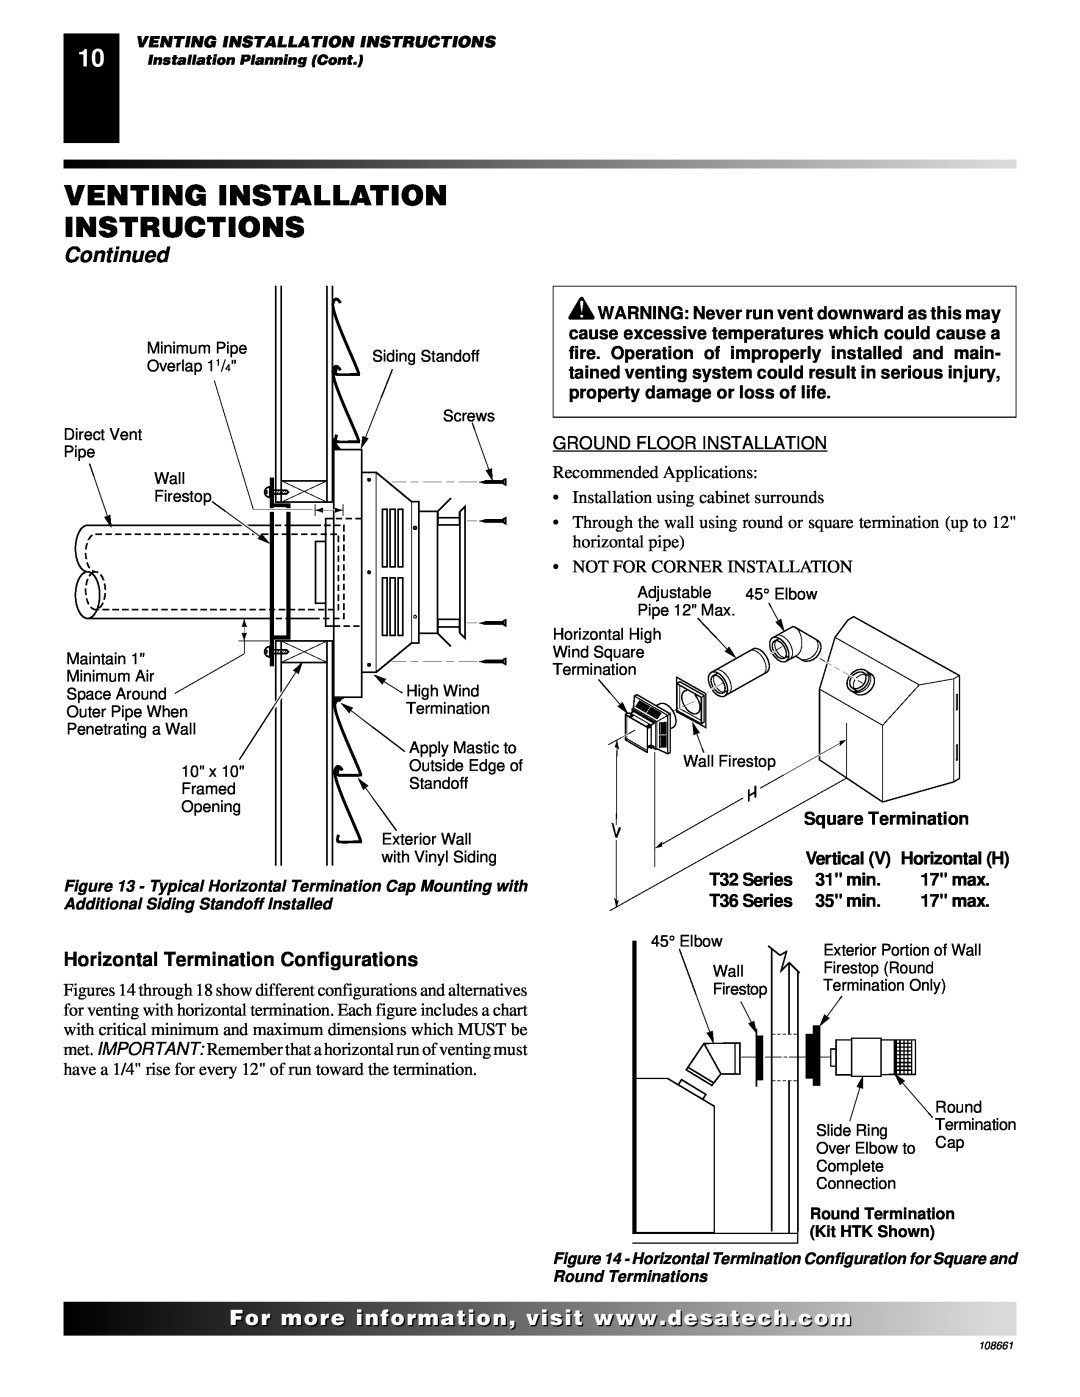 Desa T32N, T36N, T32P, T36P Venting Installation Instructions, Continued, Horizontal Termination Configurations, 17 max 